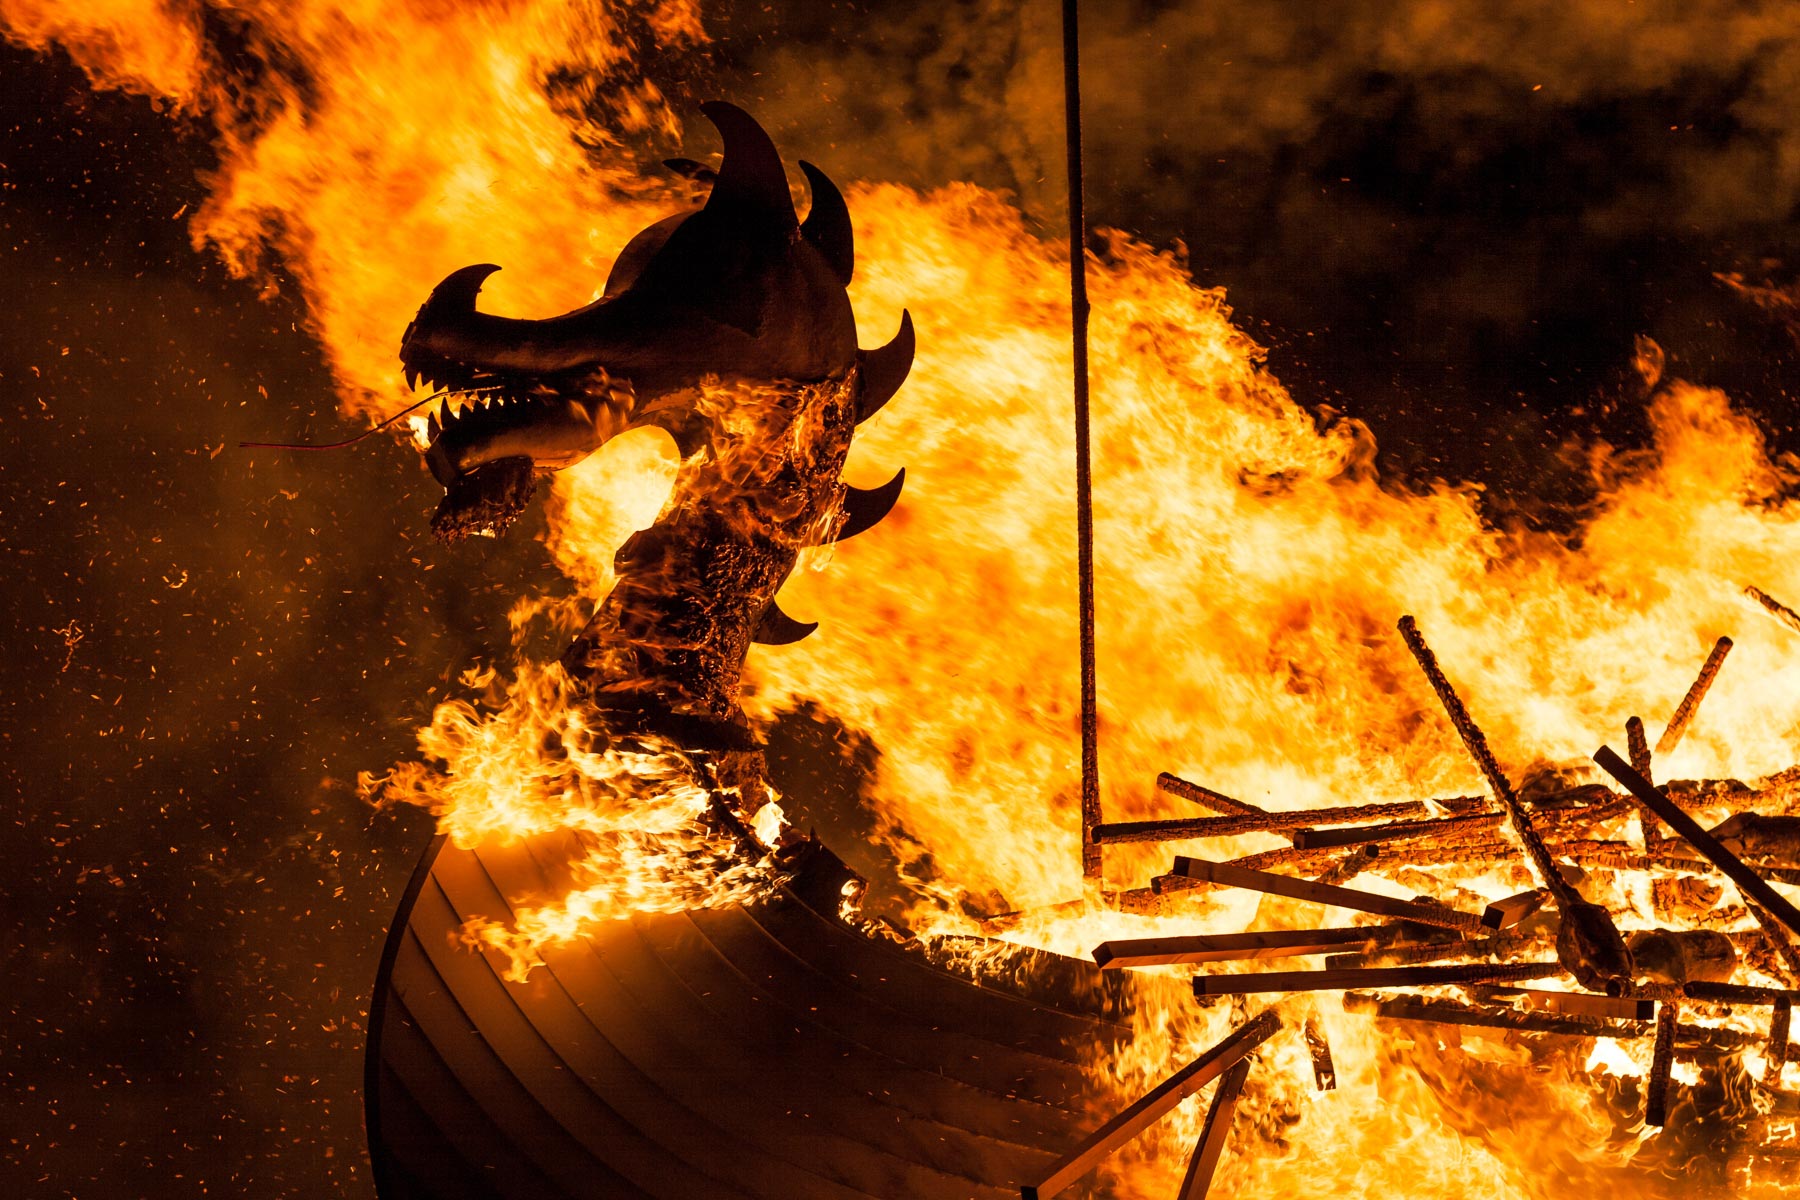 Up Helly Aa famous fire festival Scotland
best things to do Scotland